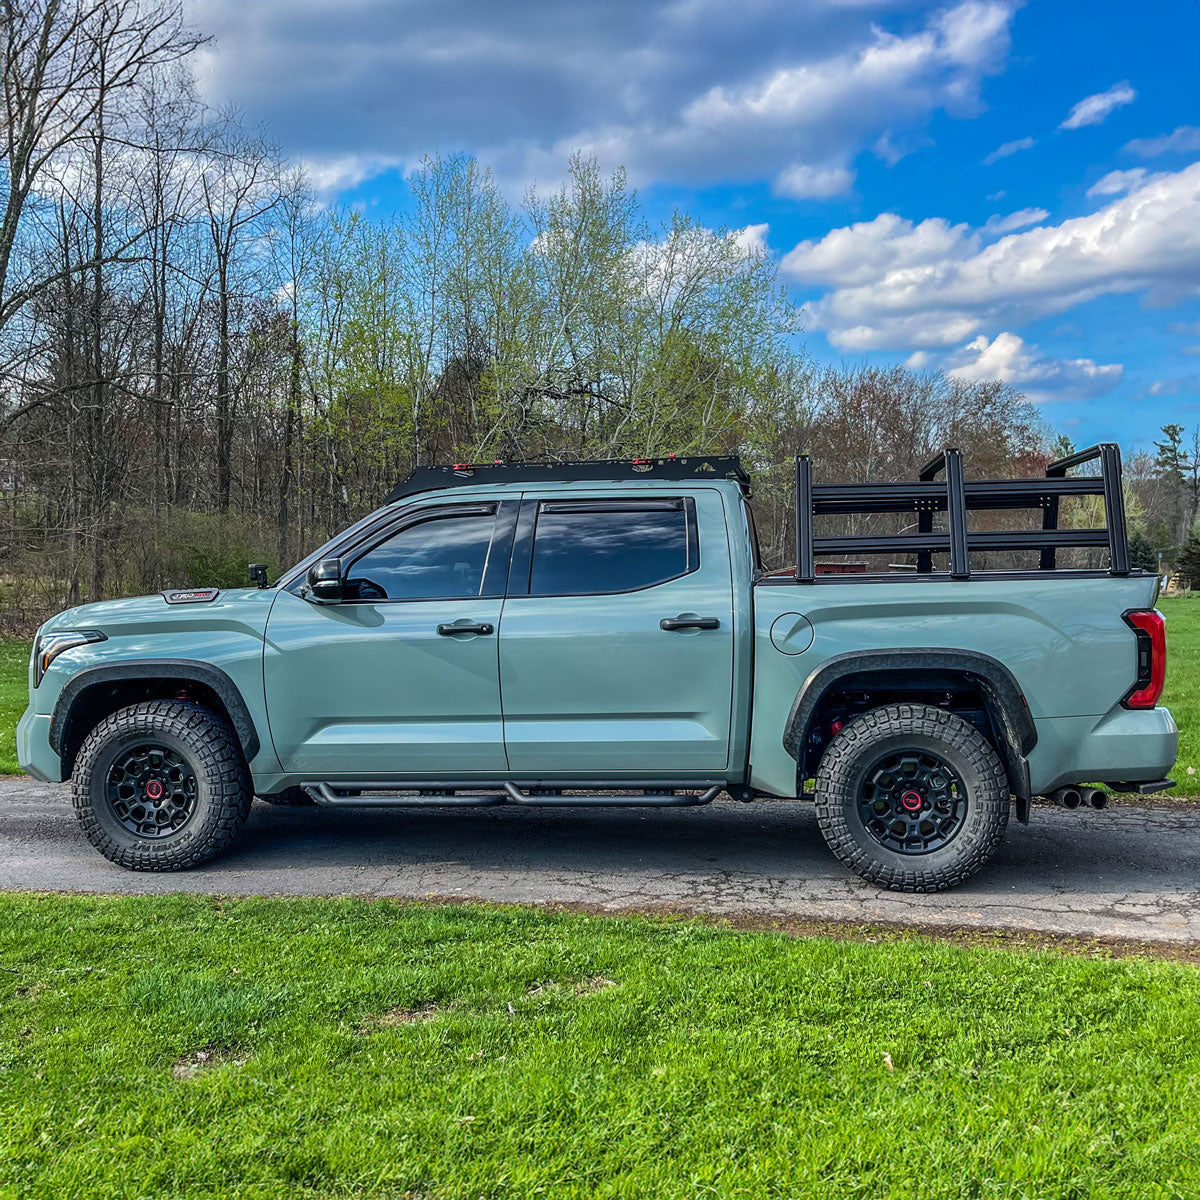 Toyota Tundra TRD Pro with XTR3 bed rack